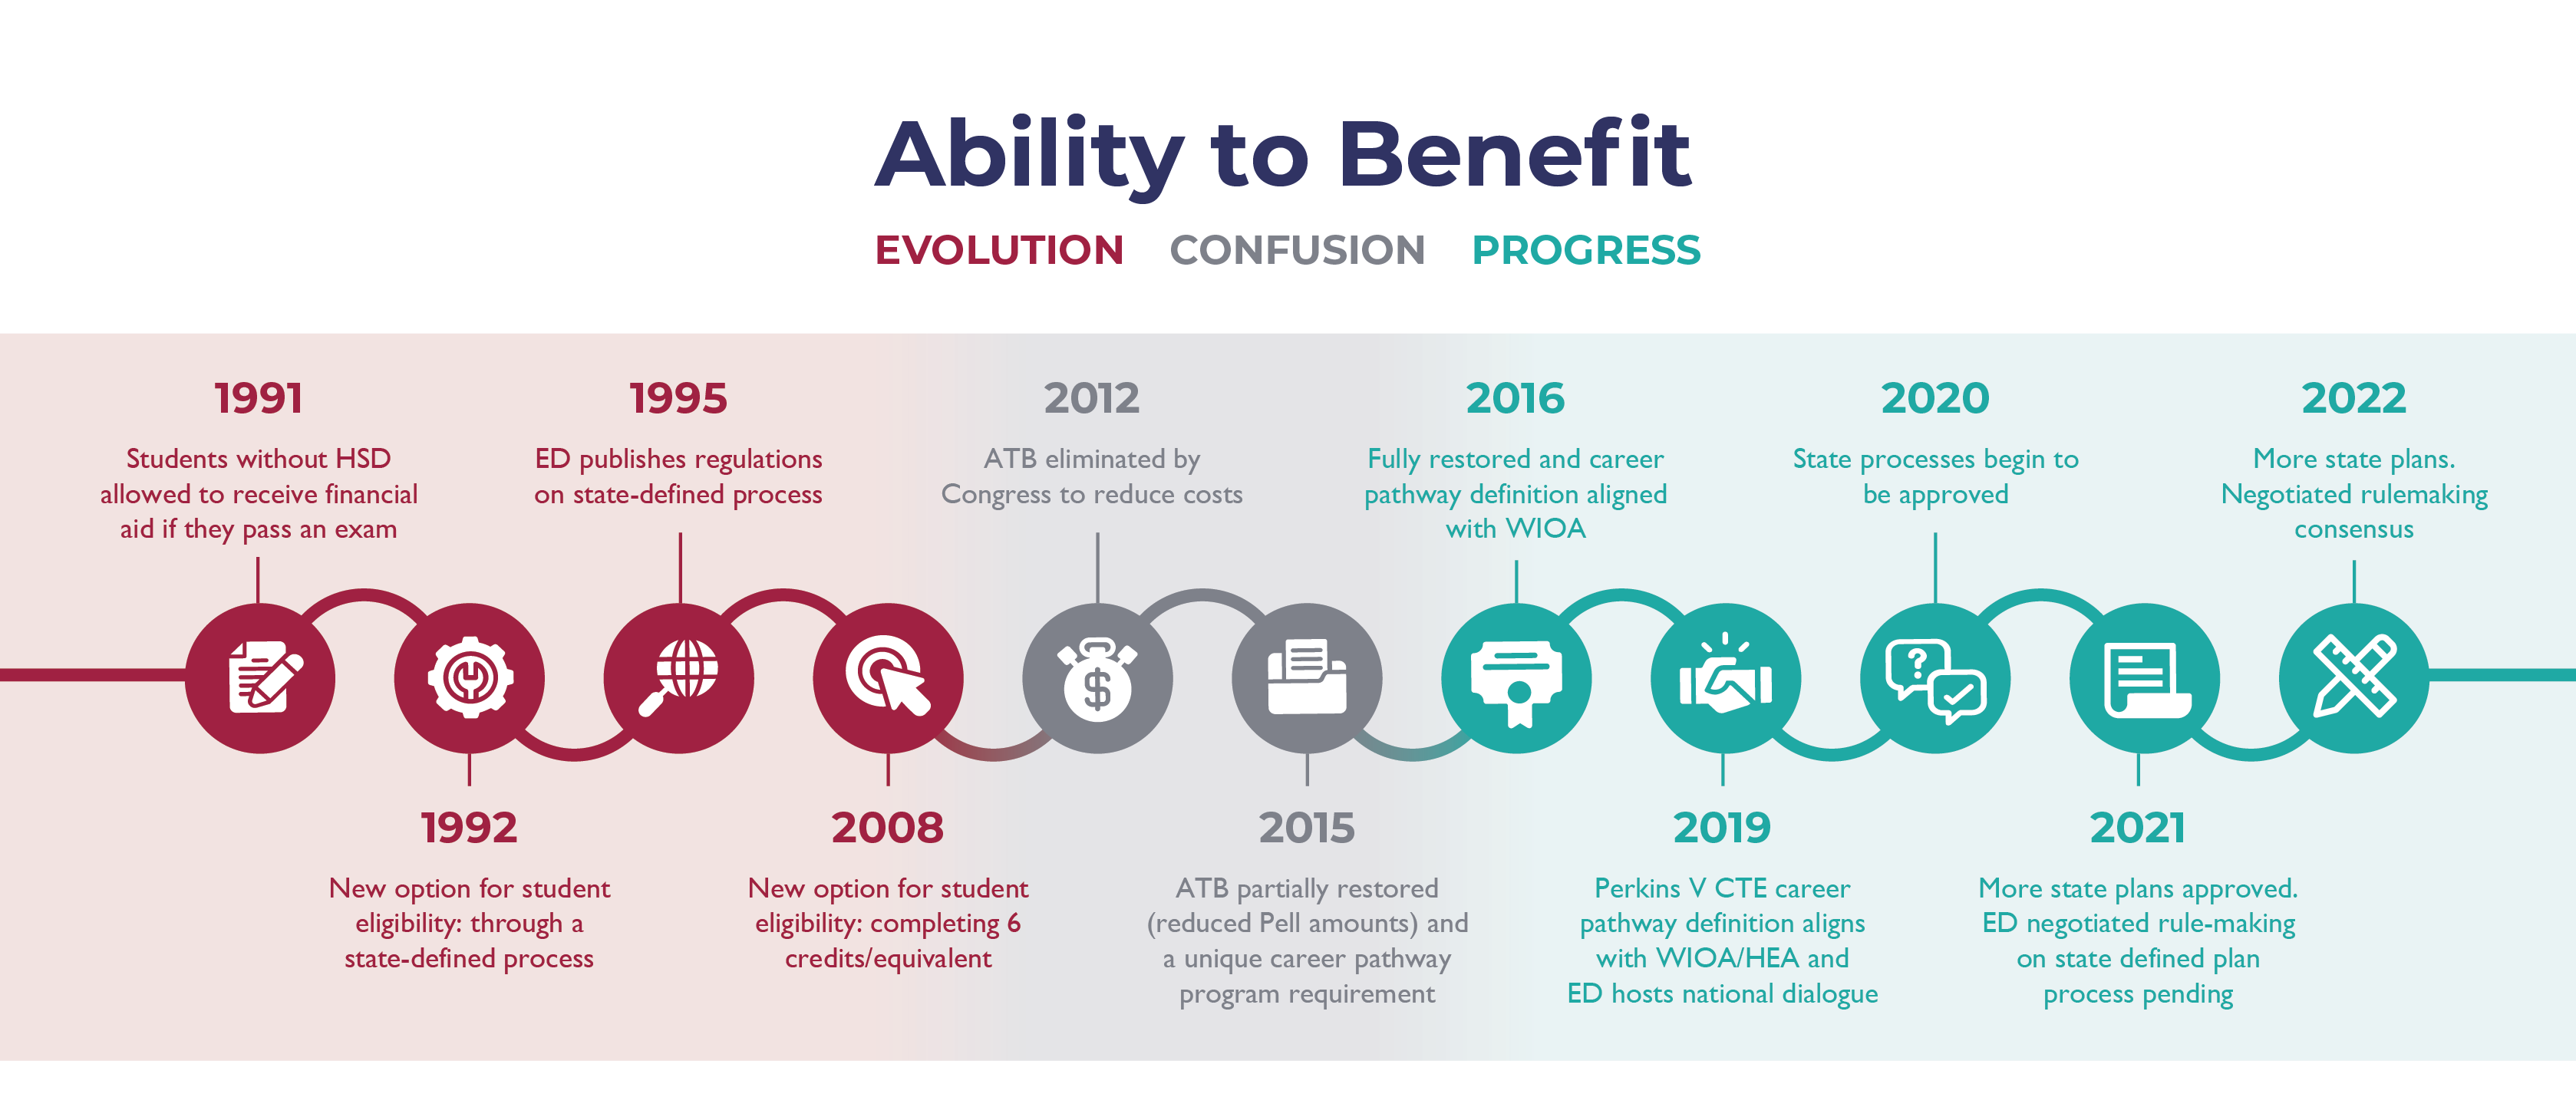 Timeline of the history of Ability to Benefit (ATB), demonstrating its evolution, complications, and progress